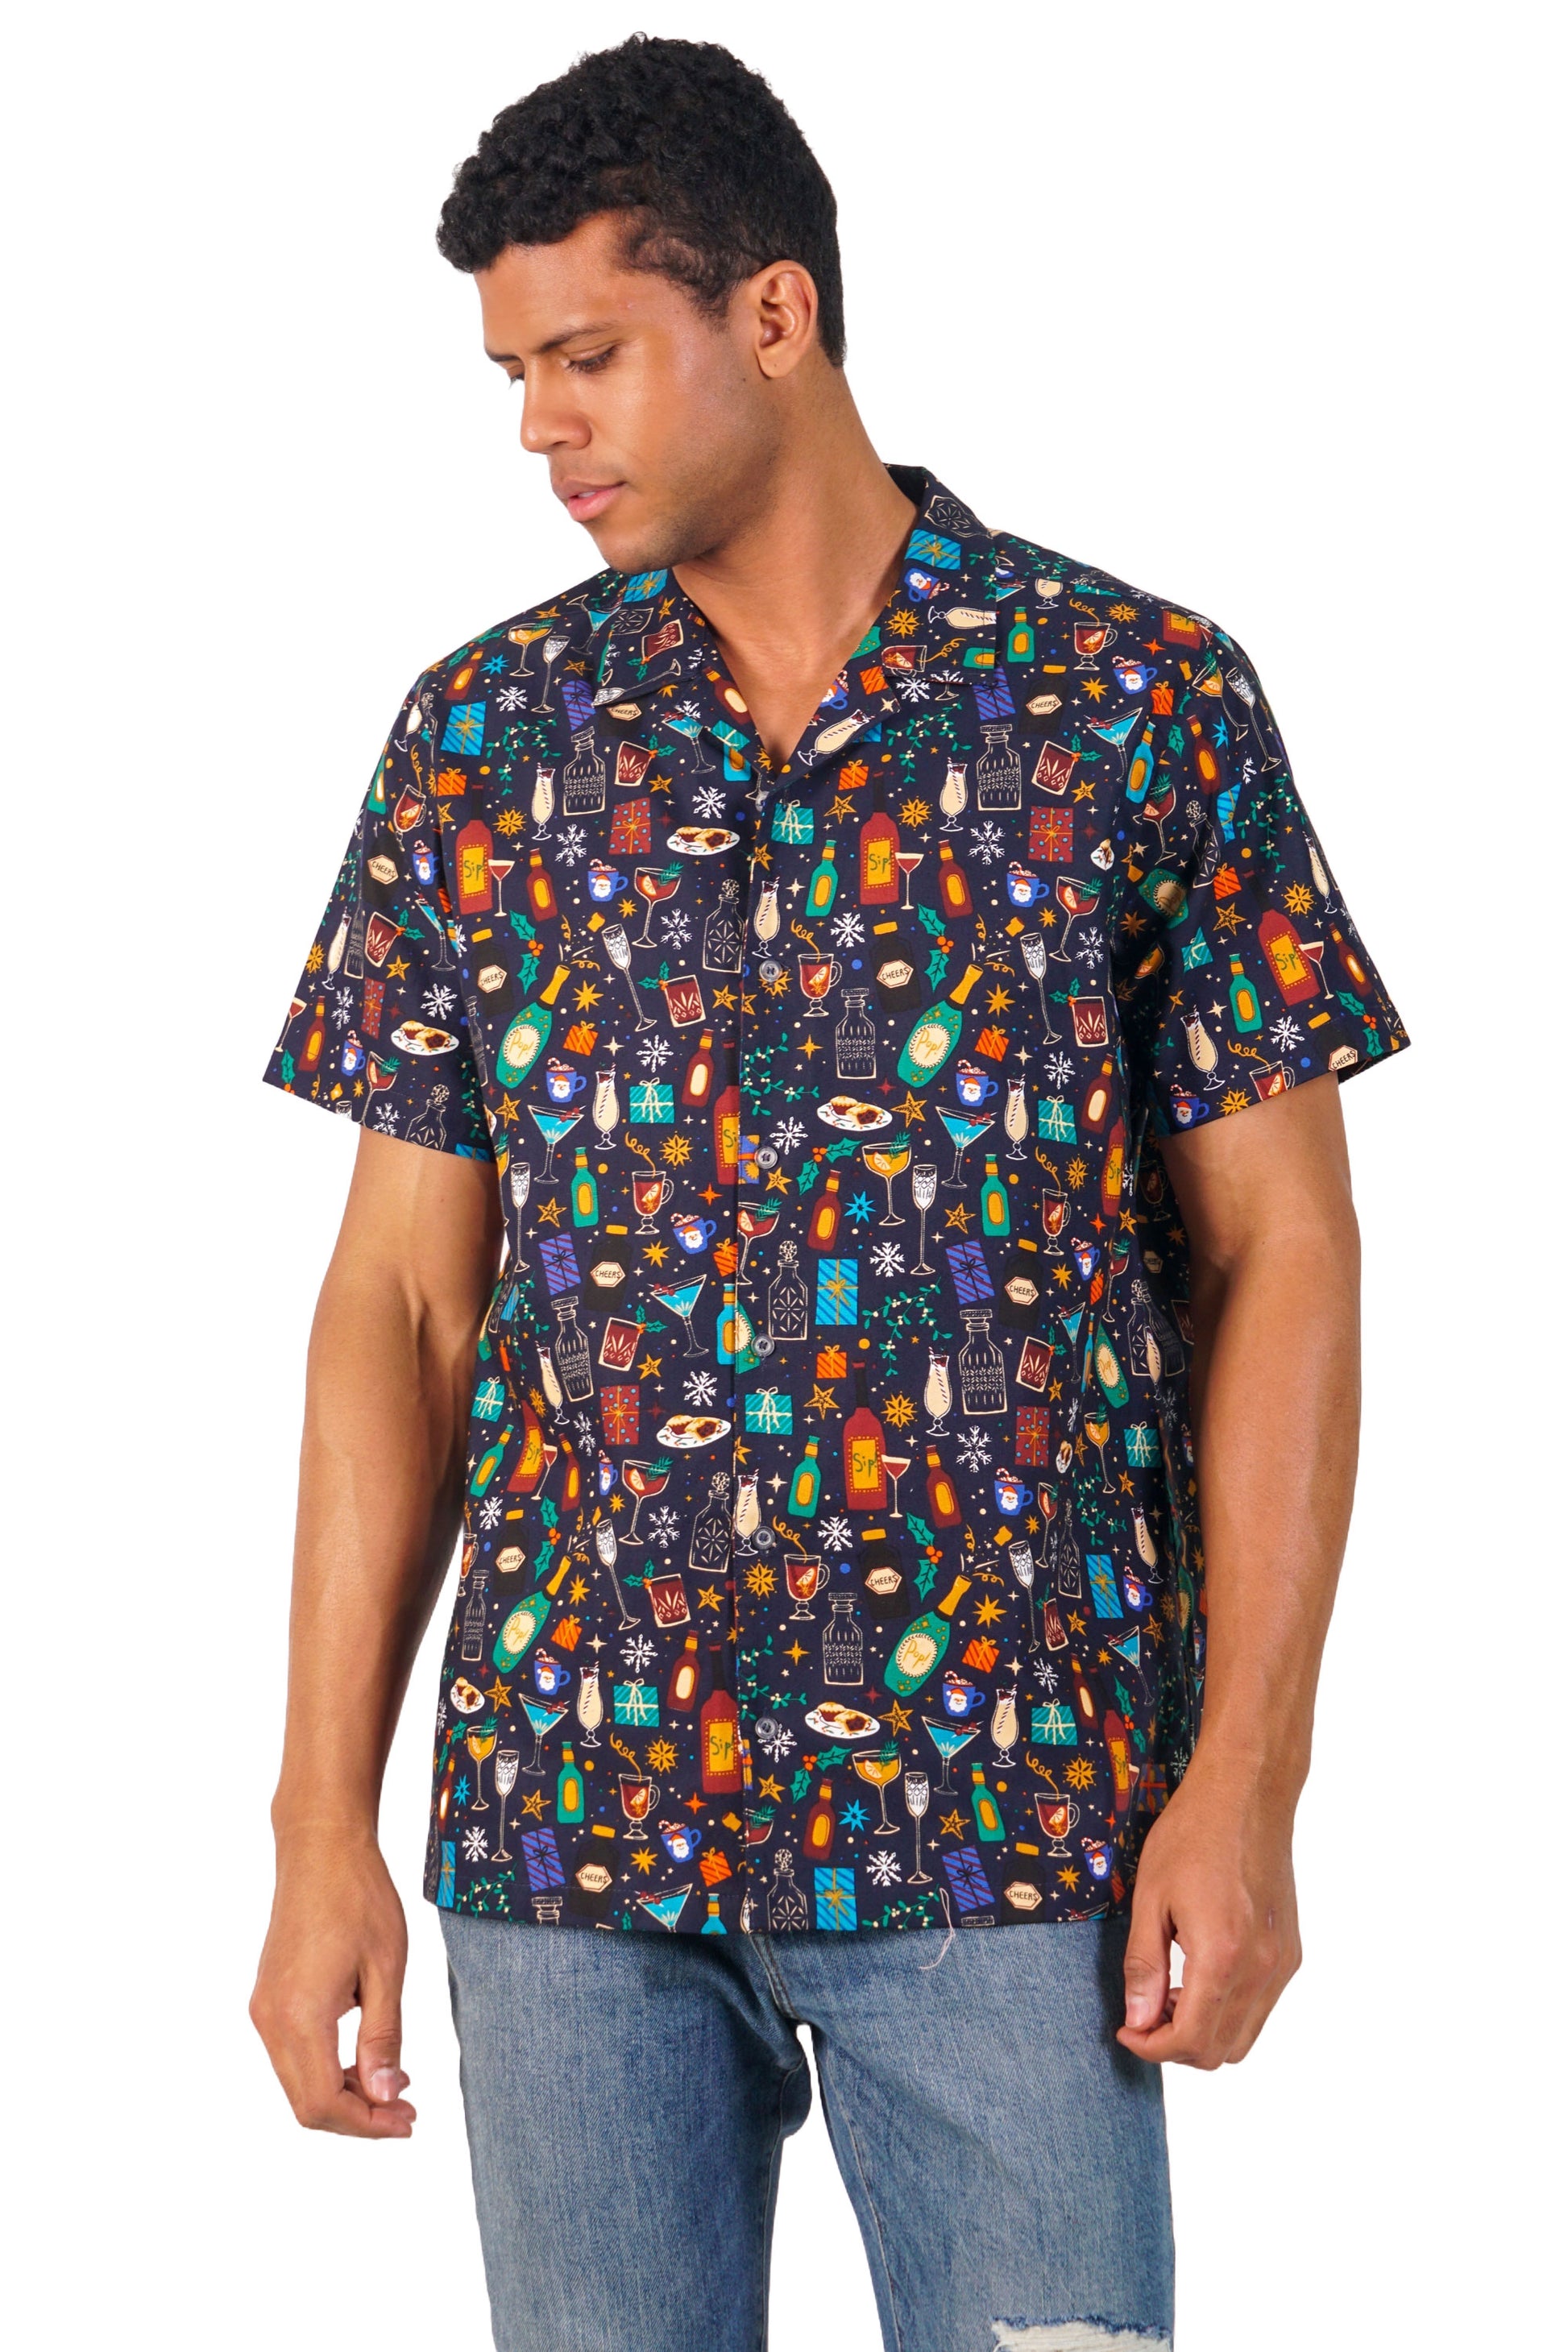 Lincoln Men's Printed Party Wear Shirt